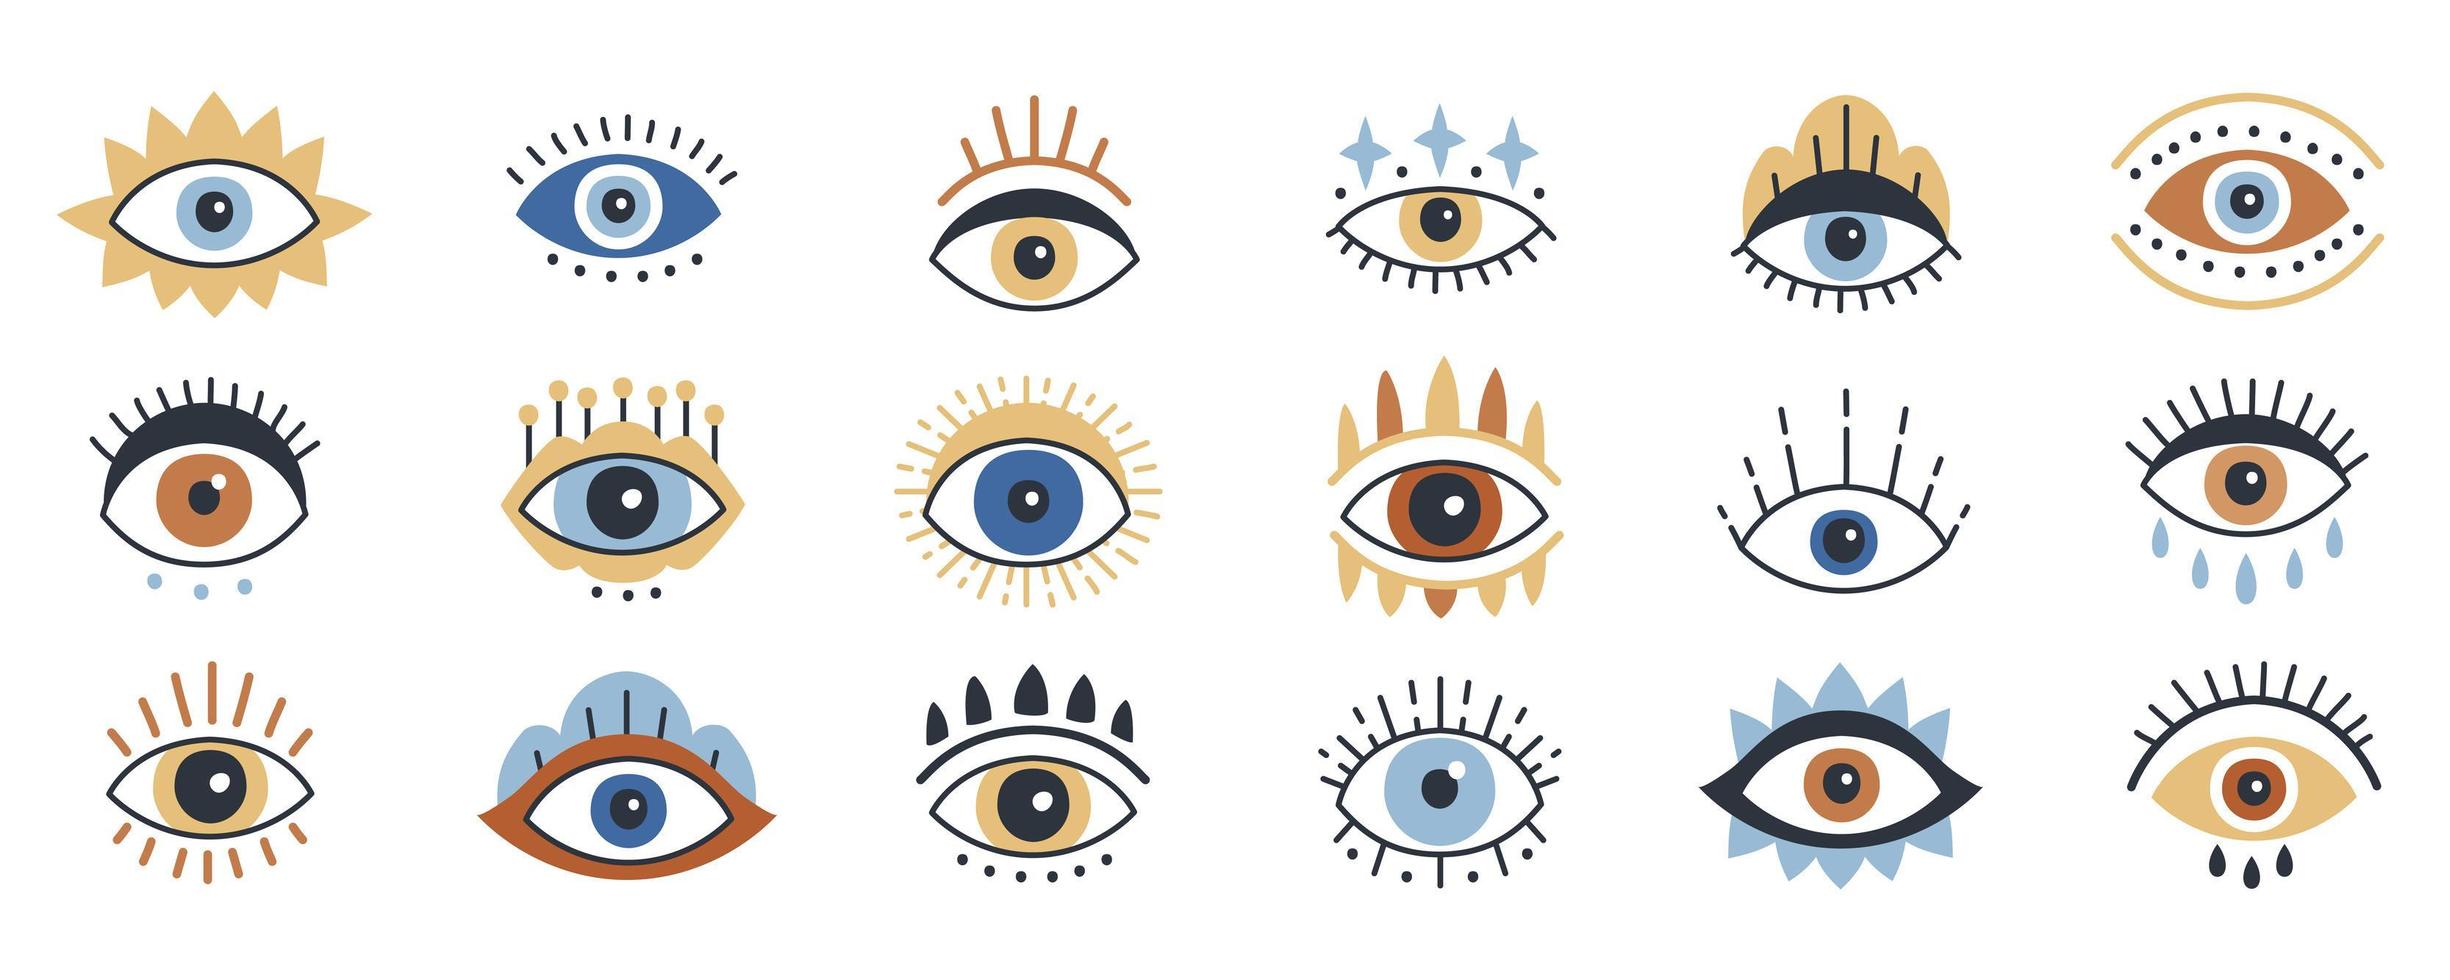 Evil magical eye set in a trending contemporary modern style vector